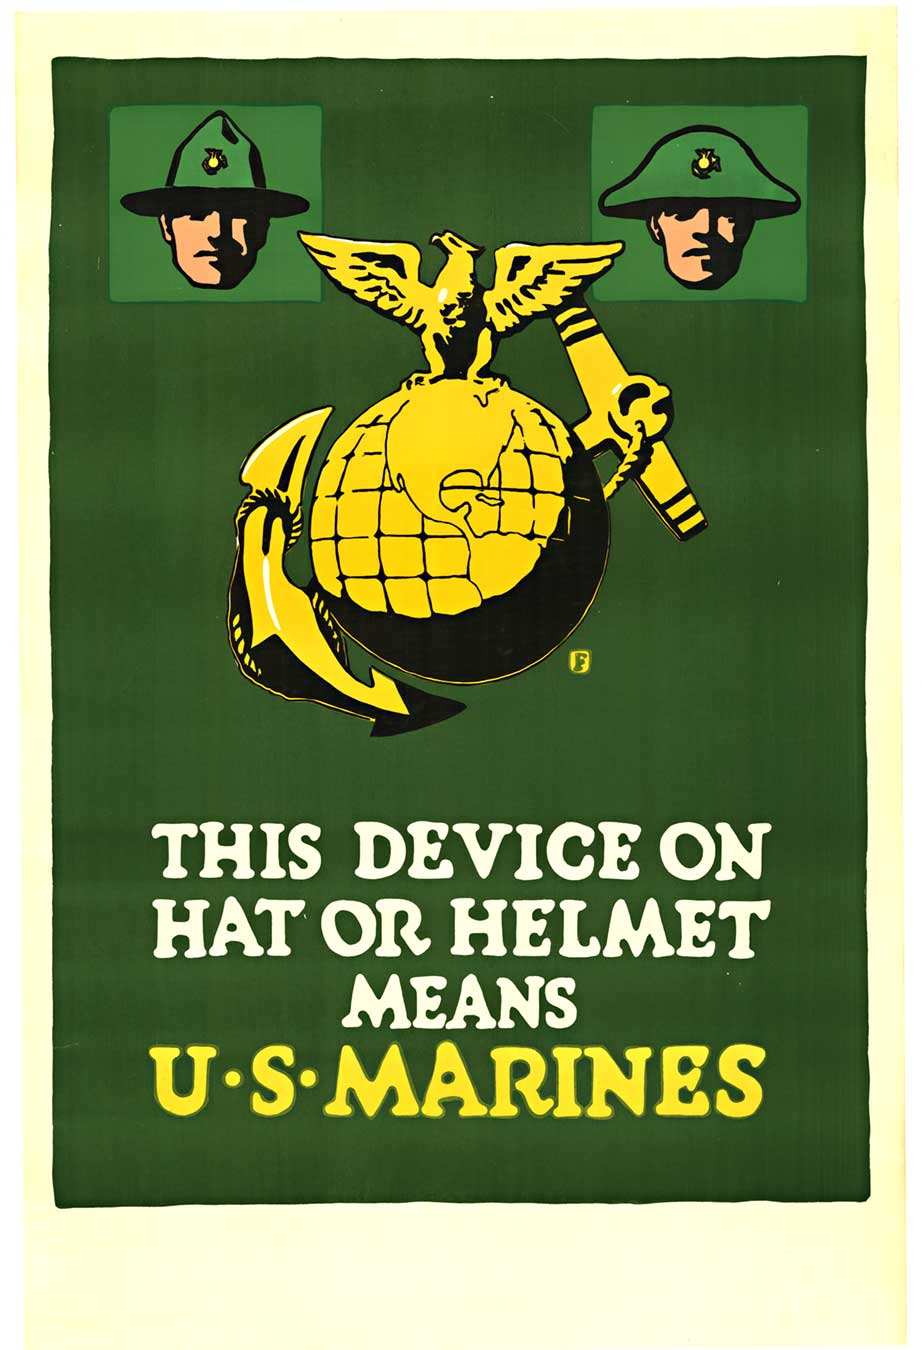 This Device on Hat or Helmet Means U.S. Marines, the circa 1917 U.S World War I (WWI) poster featuring Charles Buckles Falls artwork of the Eagle, Globe and Anchor (EGA) emblem of the U.S. Marine Corps. Note that this poster has two versions; one shows th